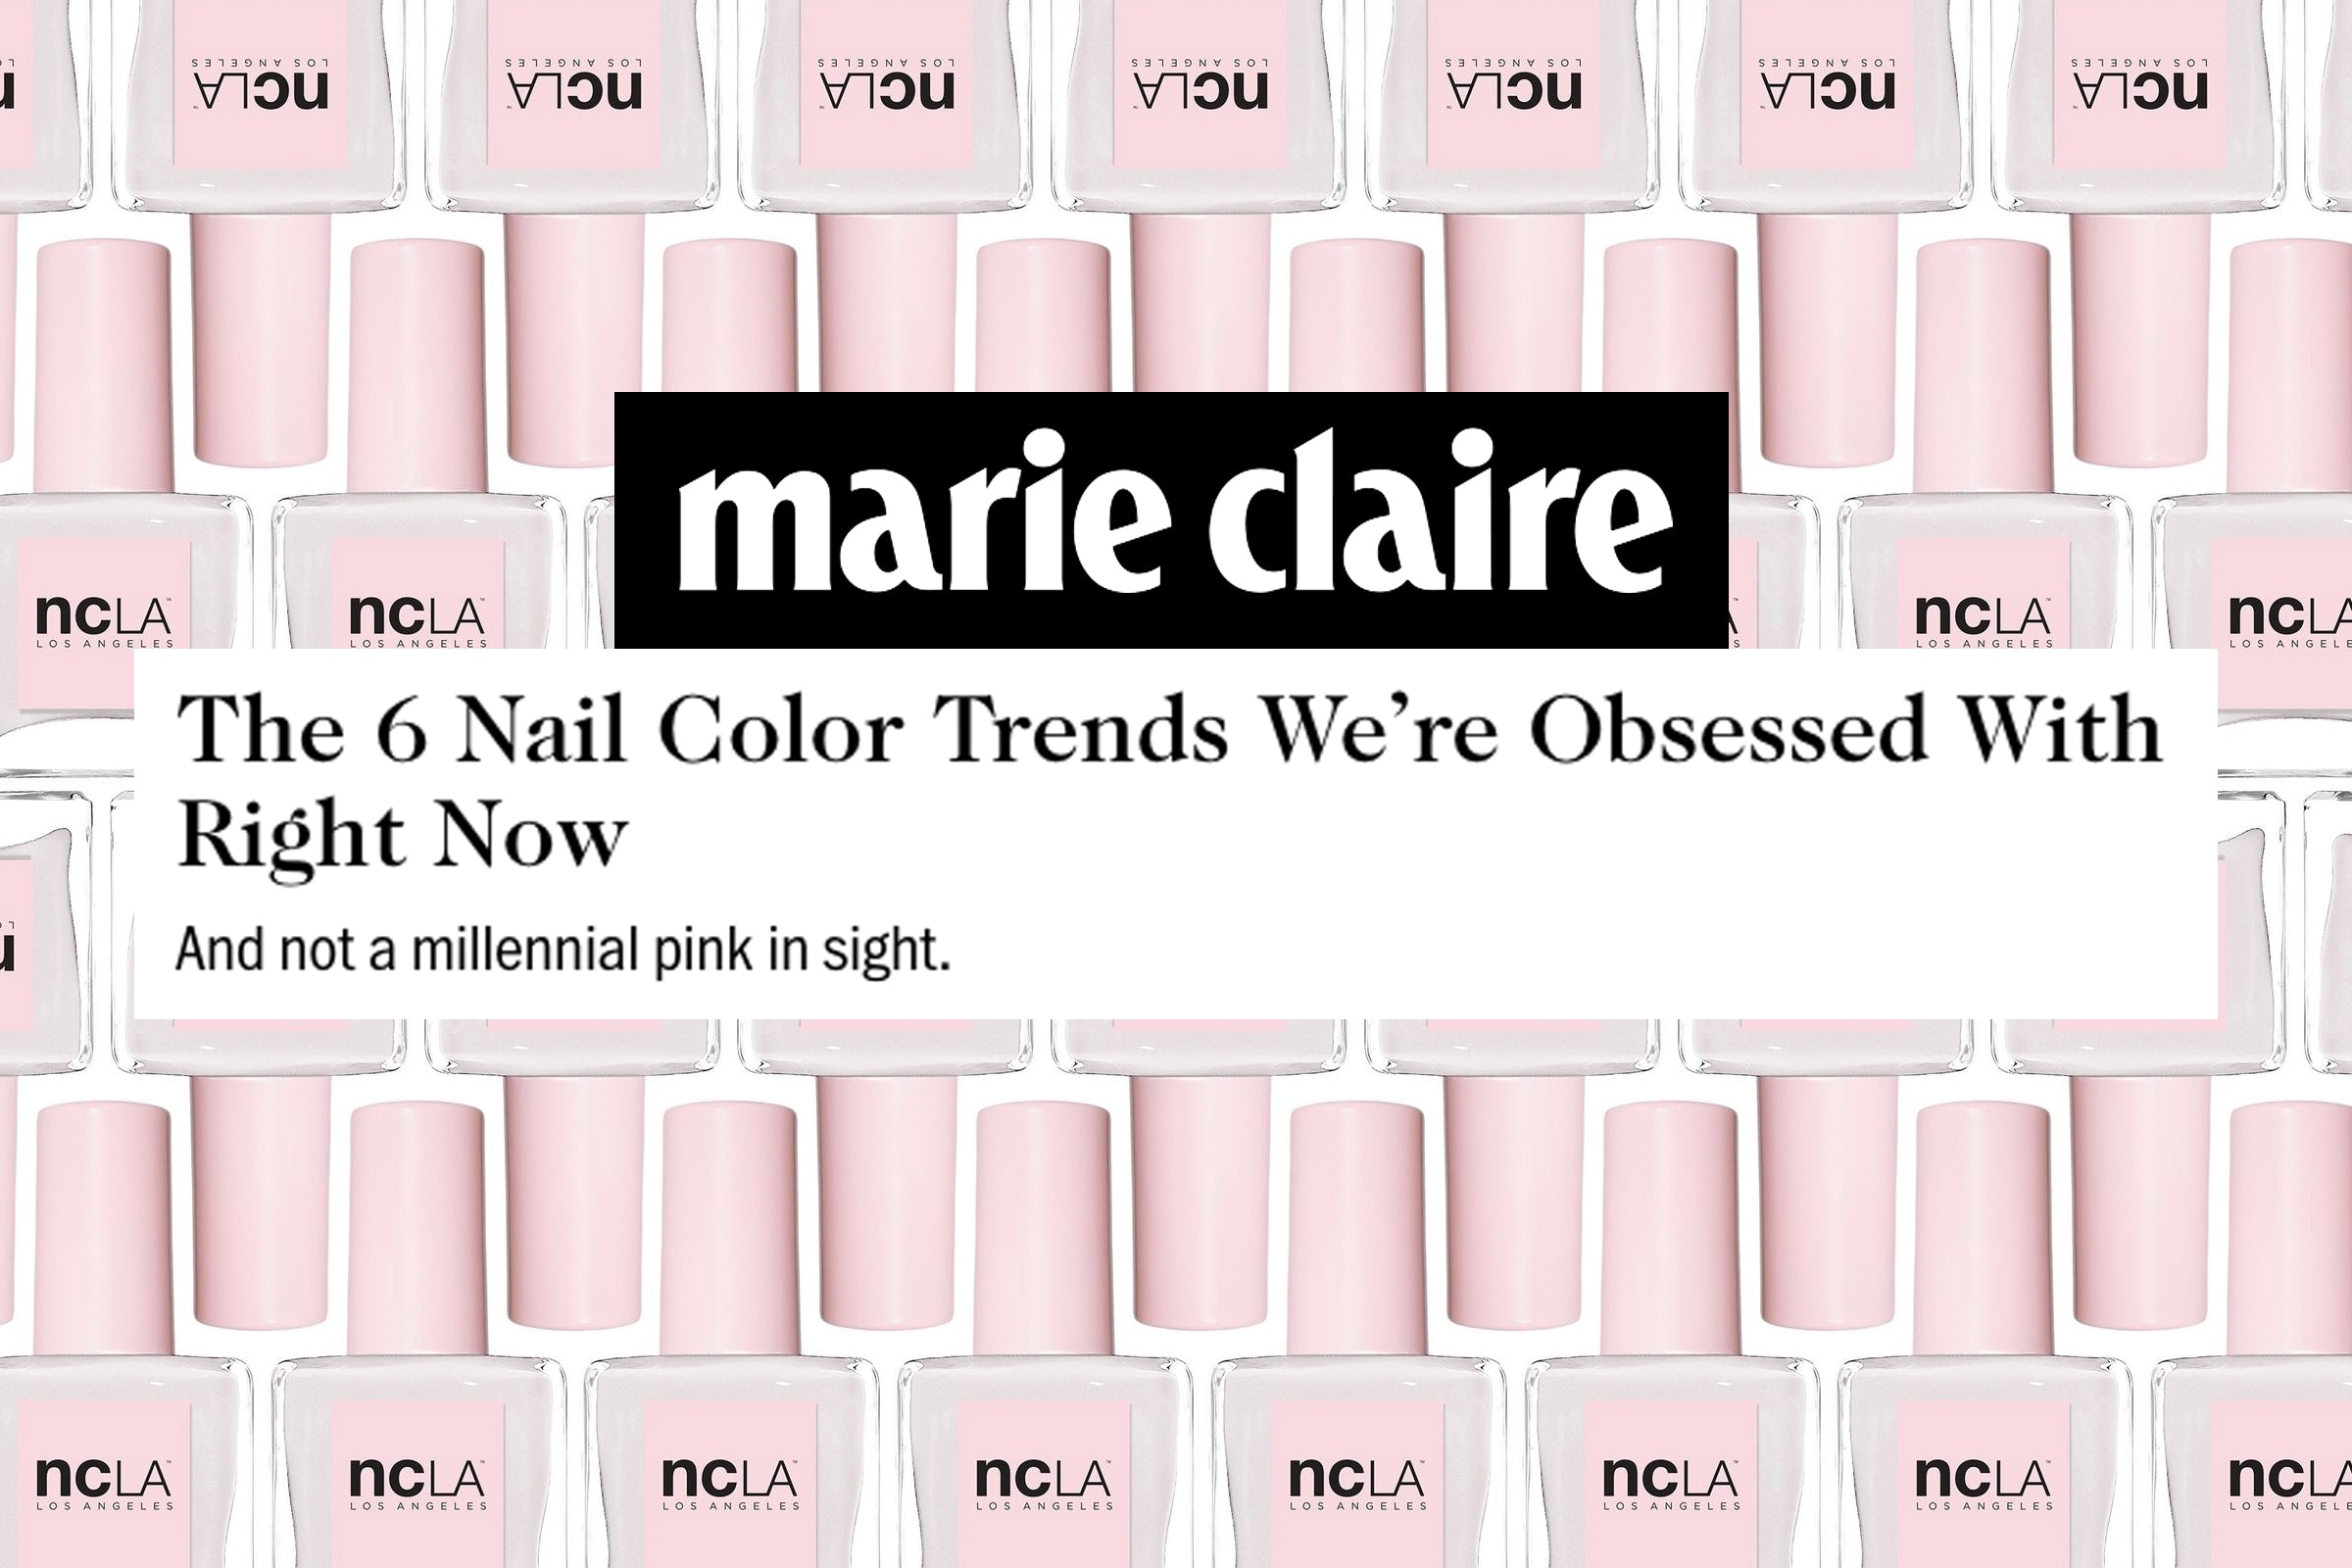 Marie Claire Nail Art Inspiration - wide 5